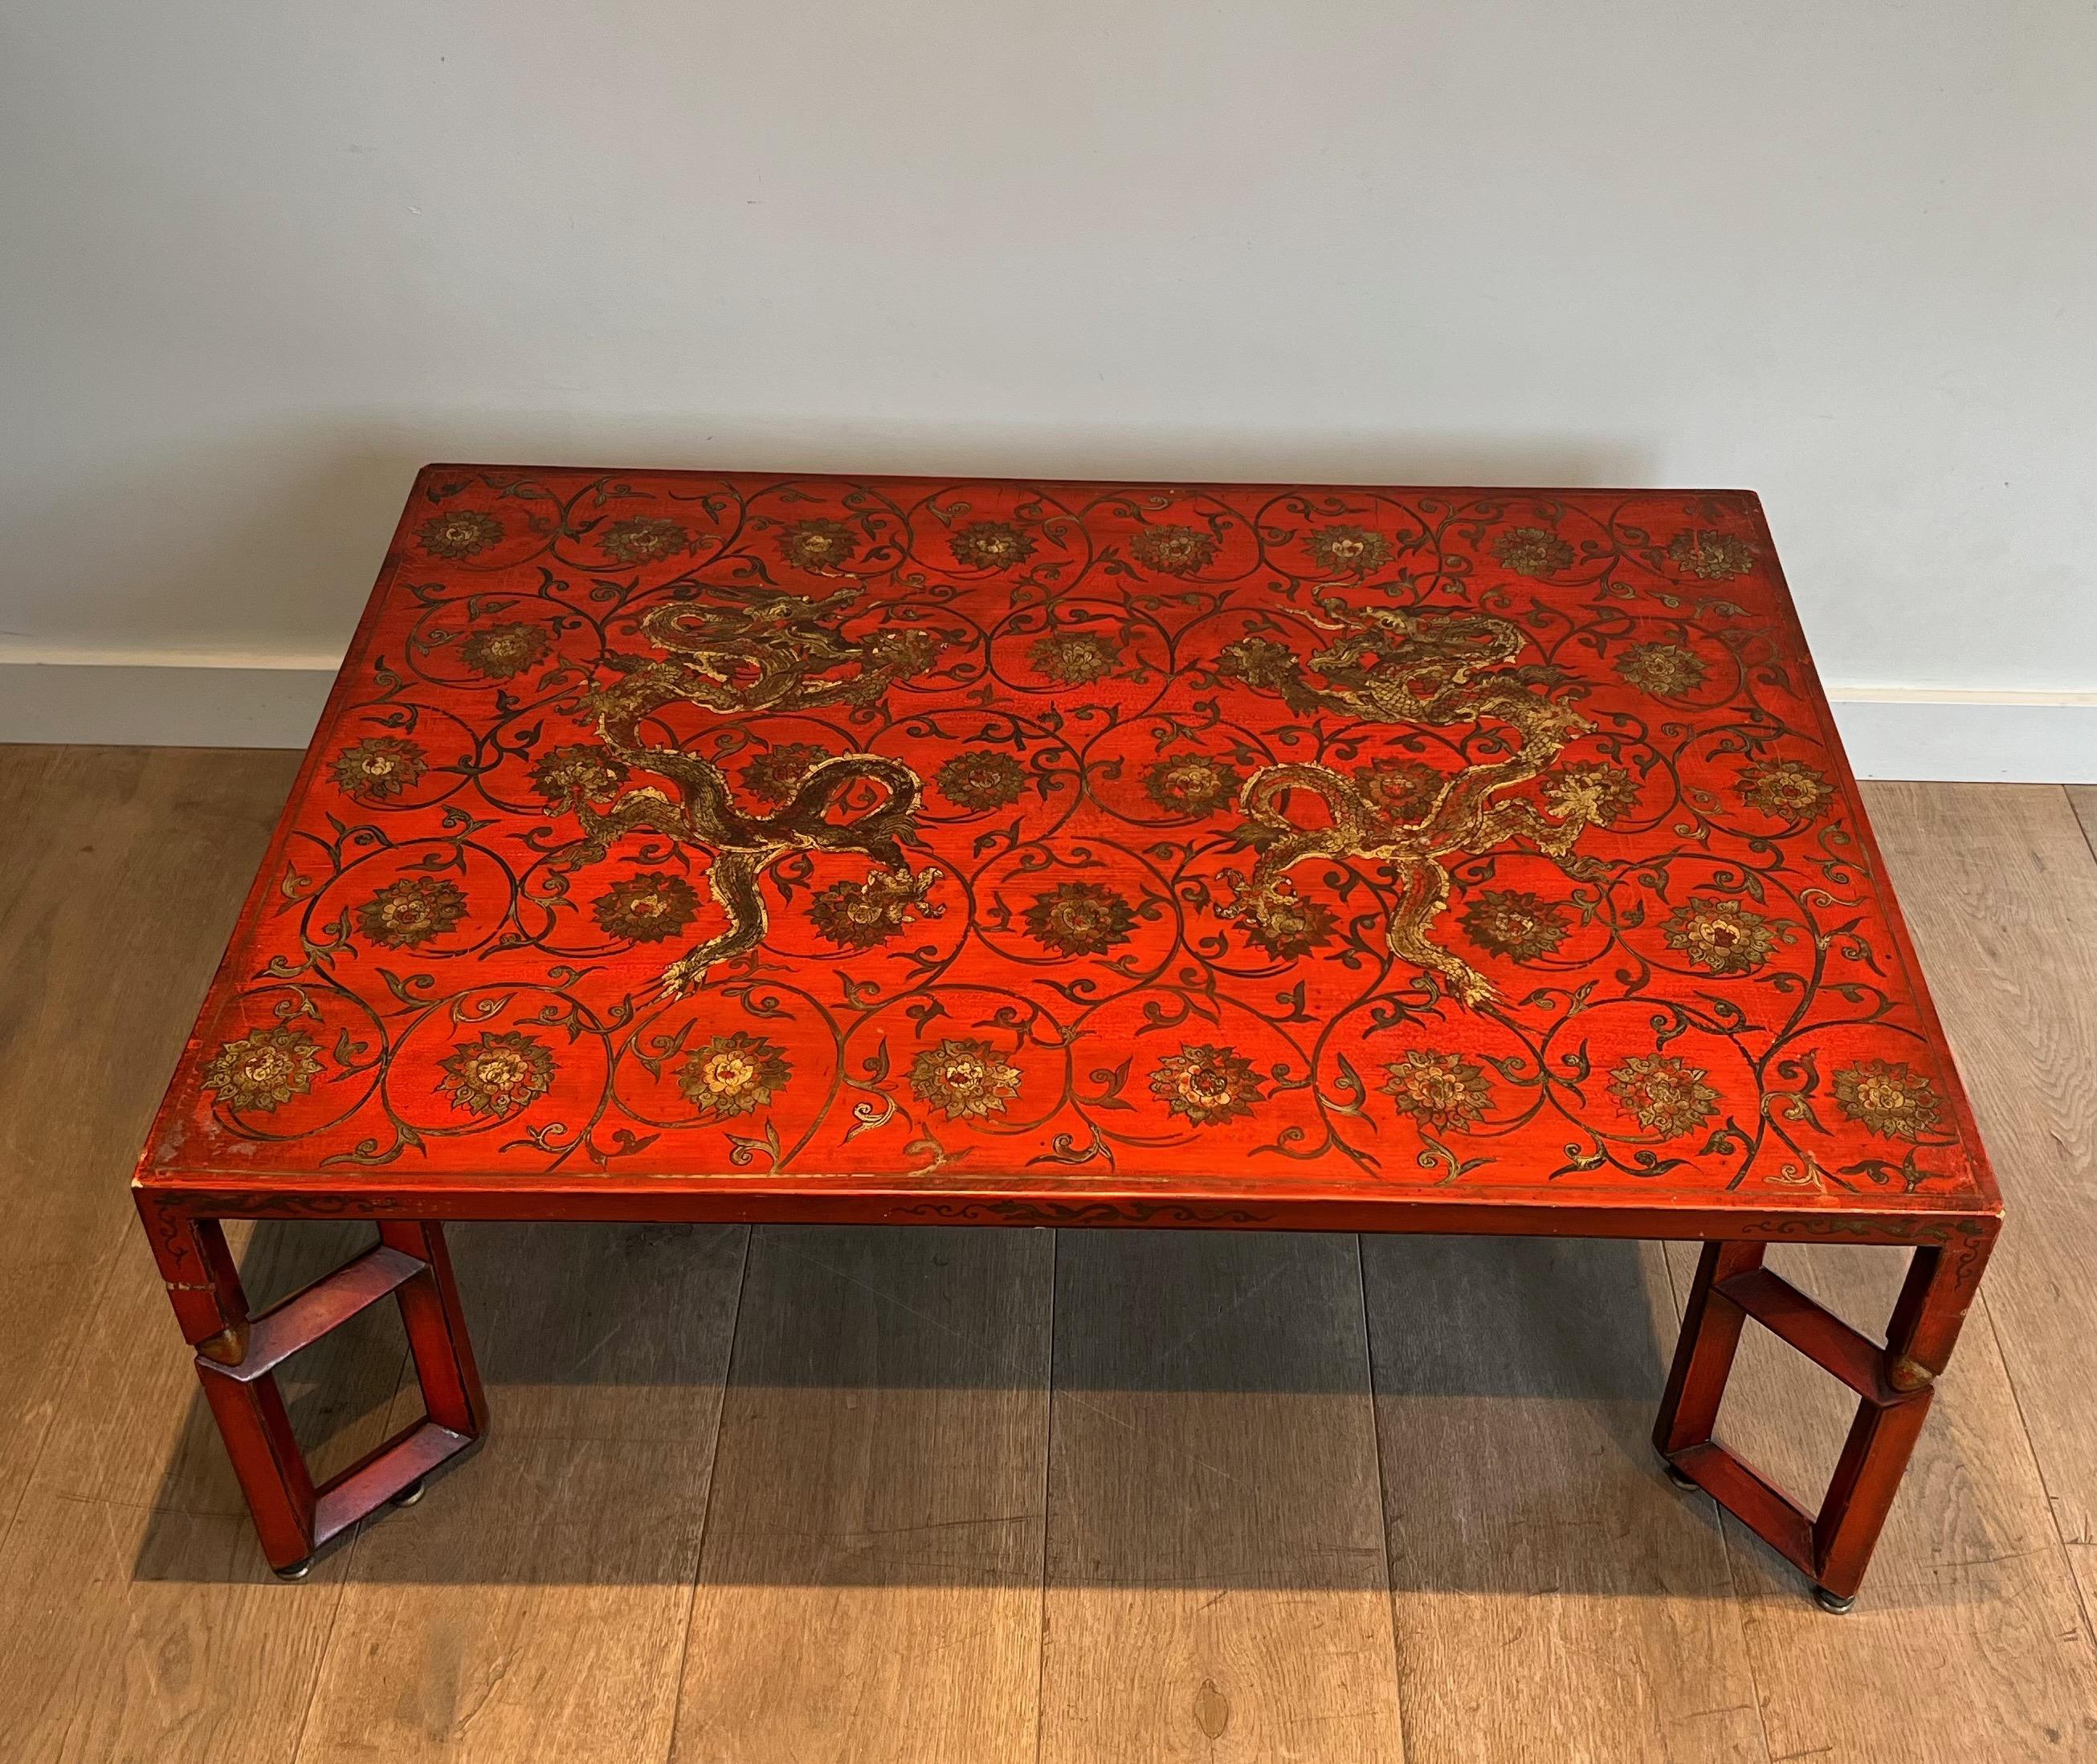 This large red lacquered coffee table is decorated with dragons, interlacing and floral motifs in polychrome and gold tones. This is a French work. Circa 1970.